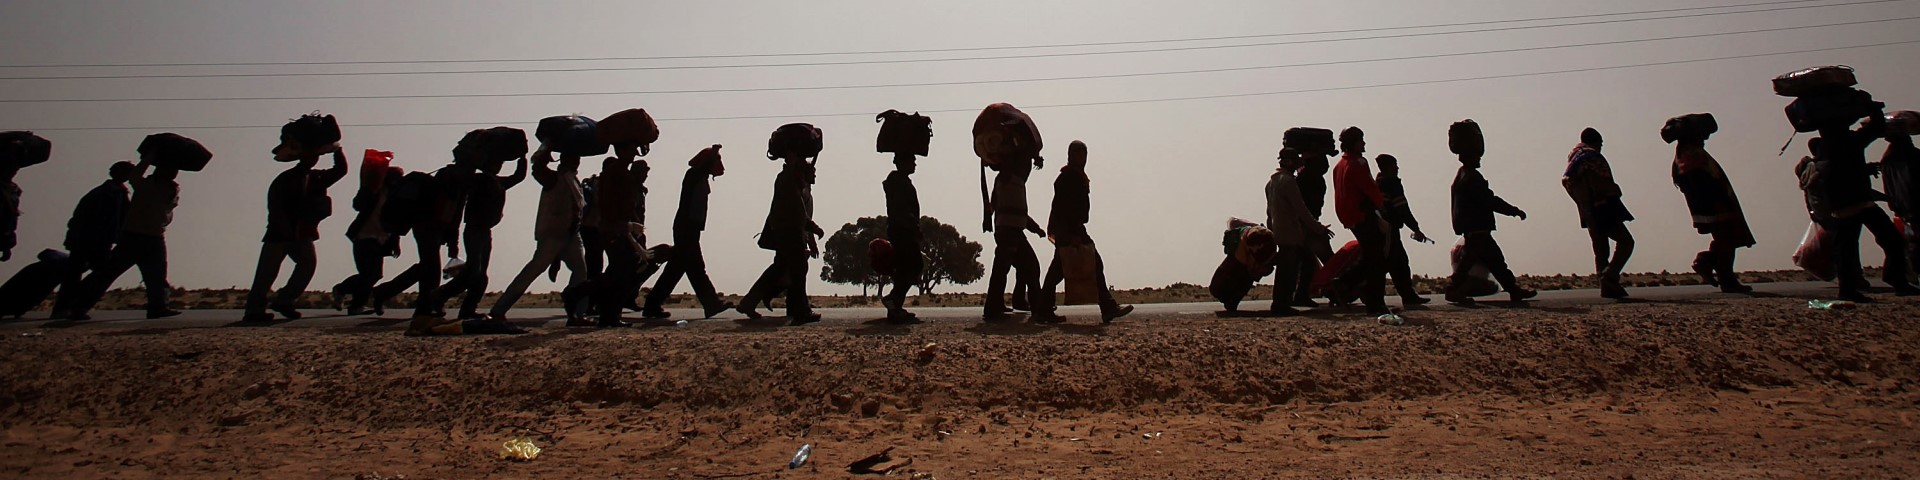 A group of people walking in the desert and carrying heavy luggage